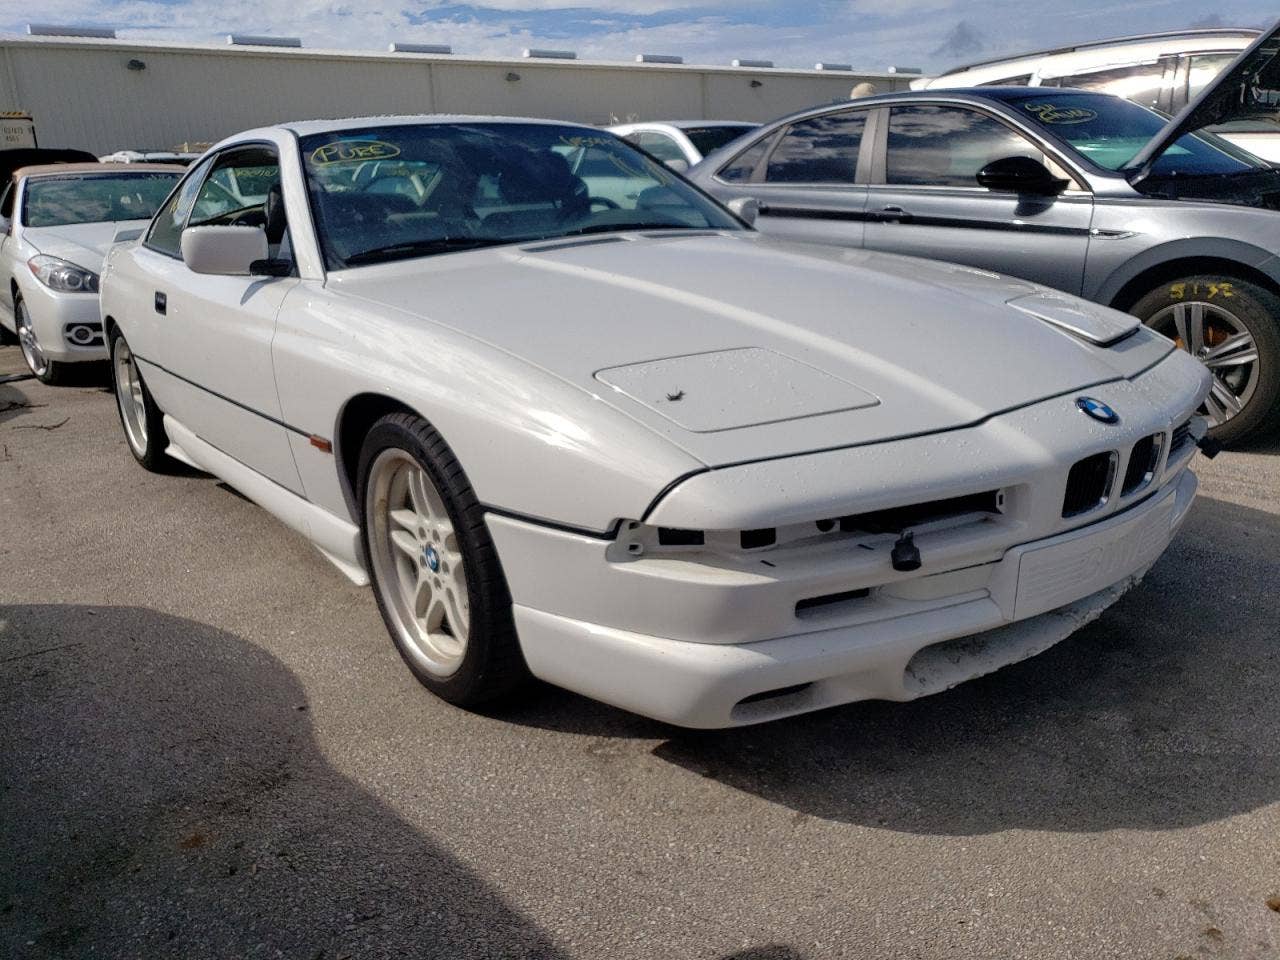 Ultra-Rare 1994 BMW 850CSi Damaged by Hurricane Ian Needs Your Wallet and Courage